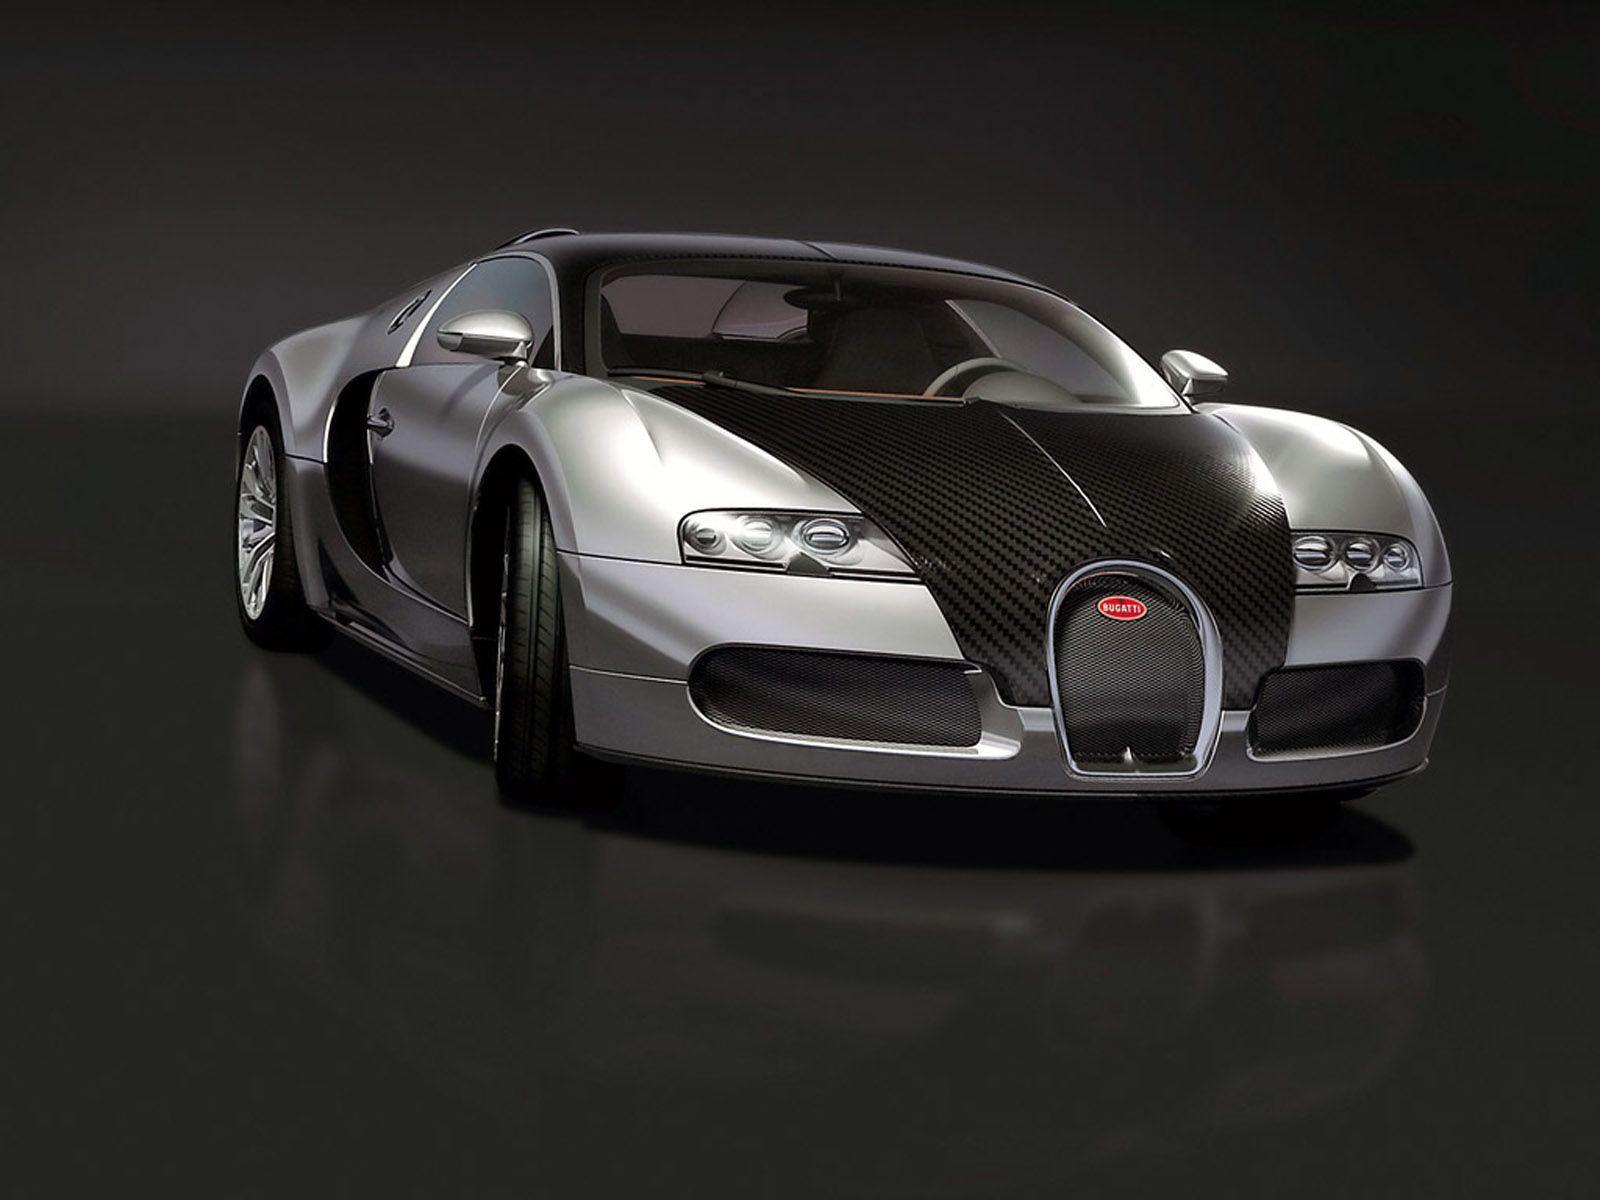 best image about Bugatti Car. Cars, Exotic cars